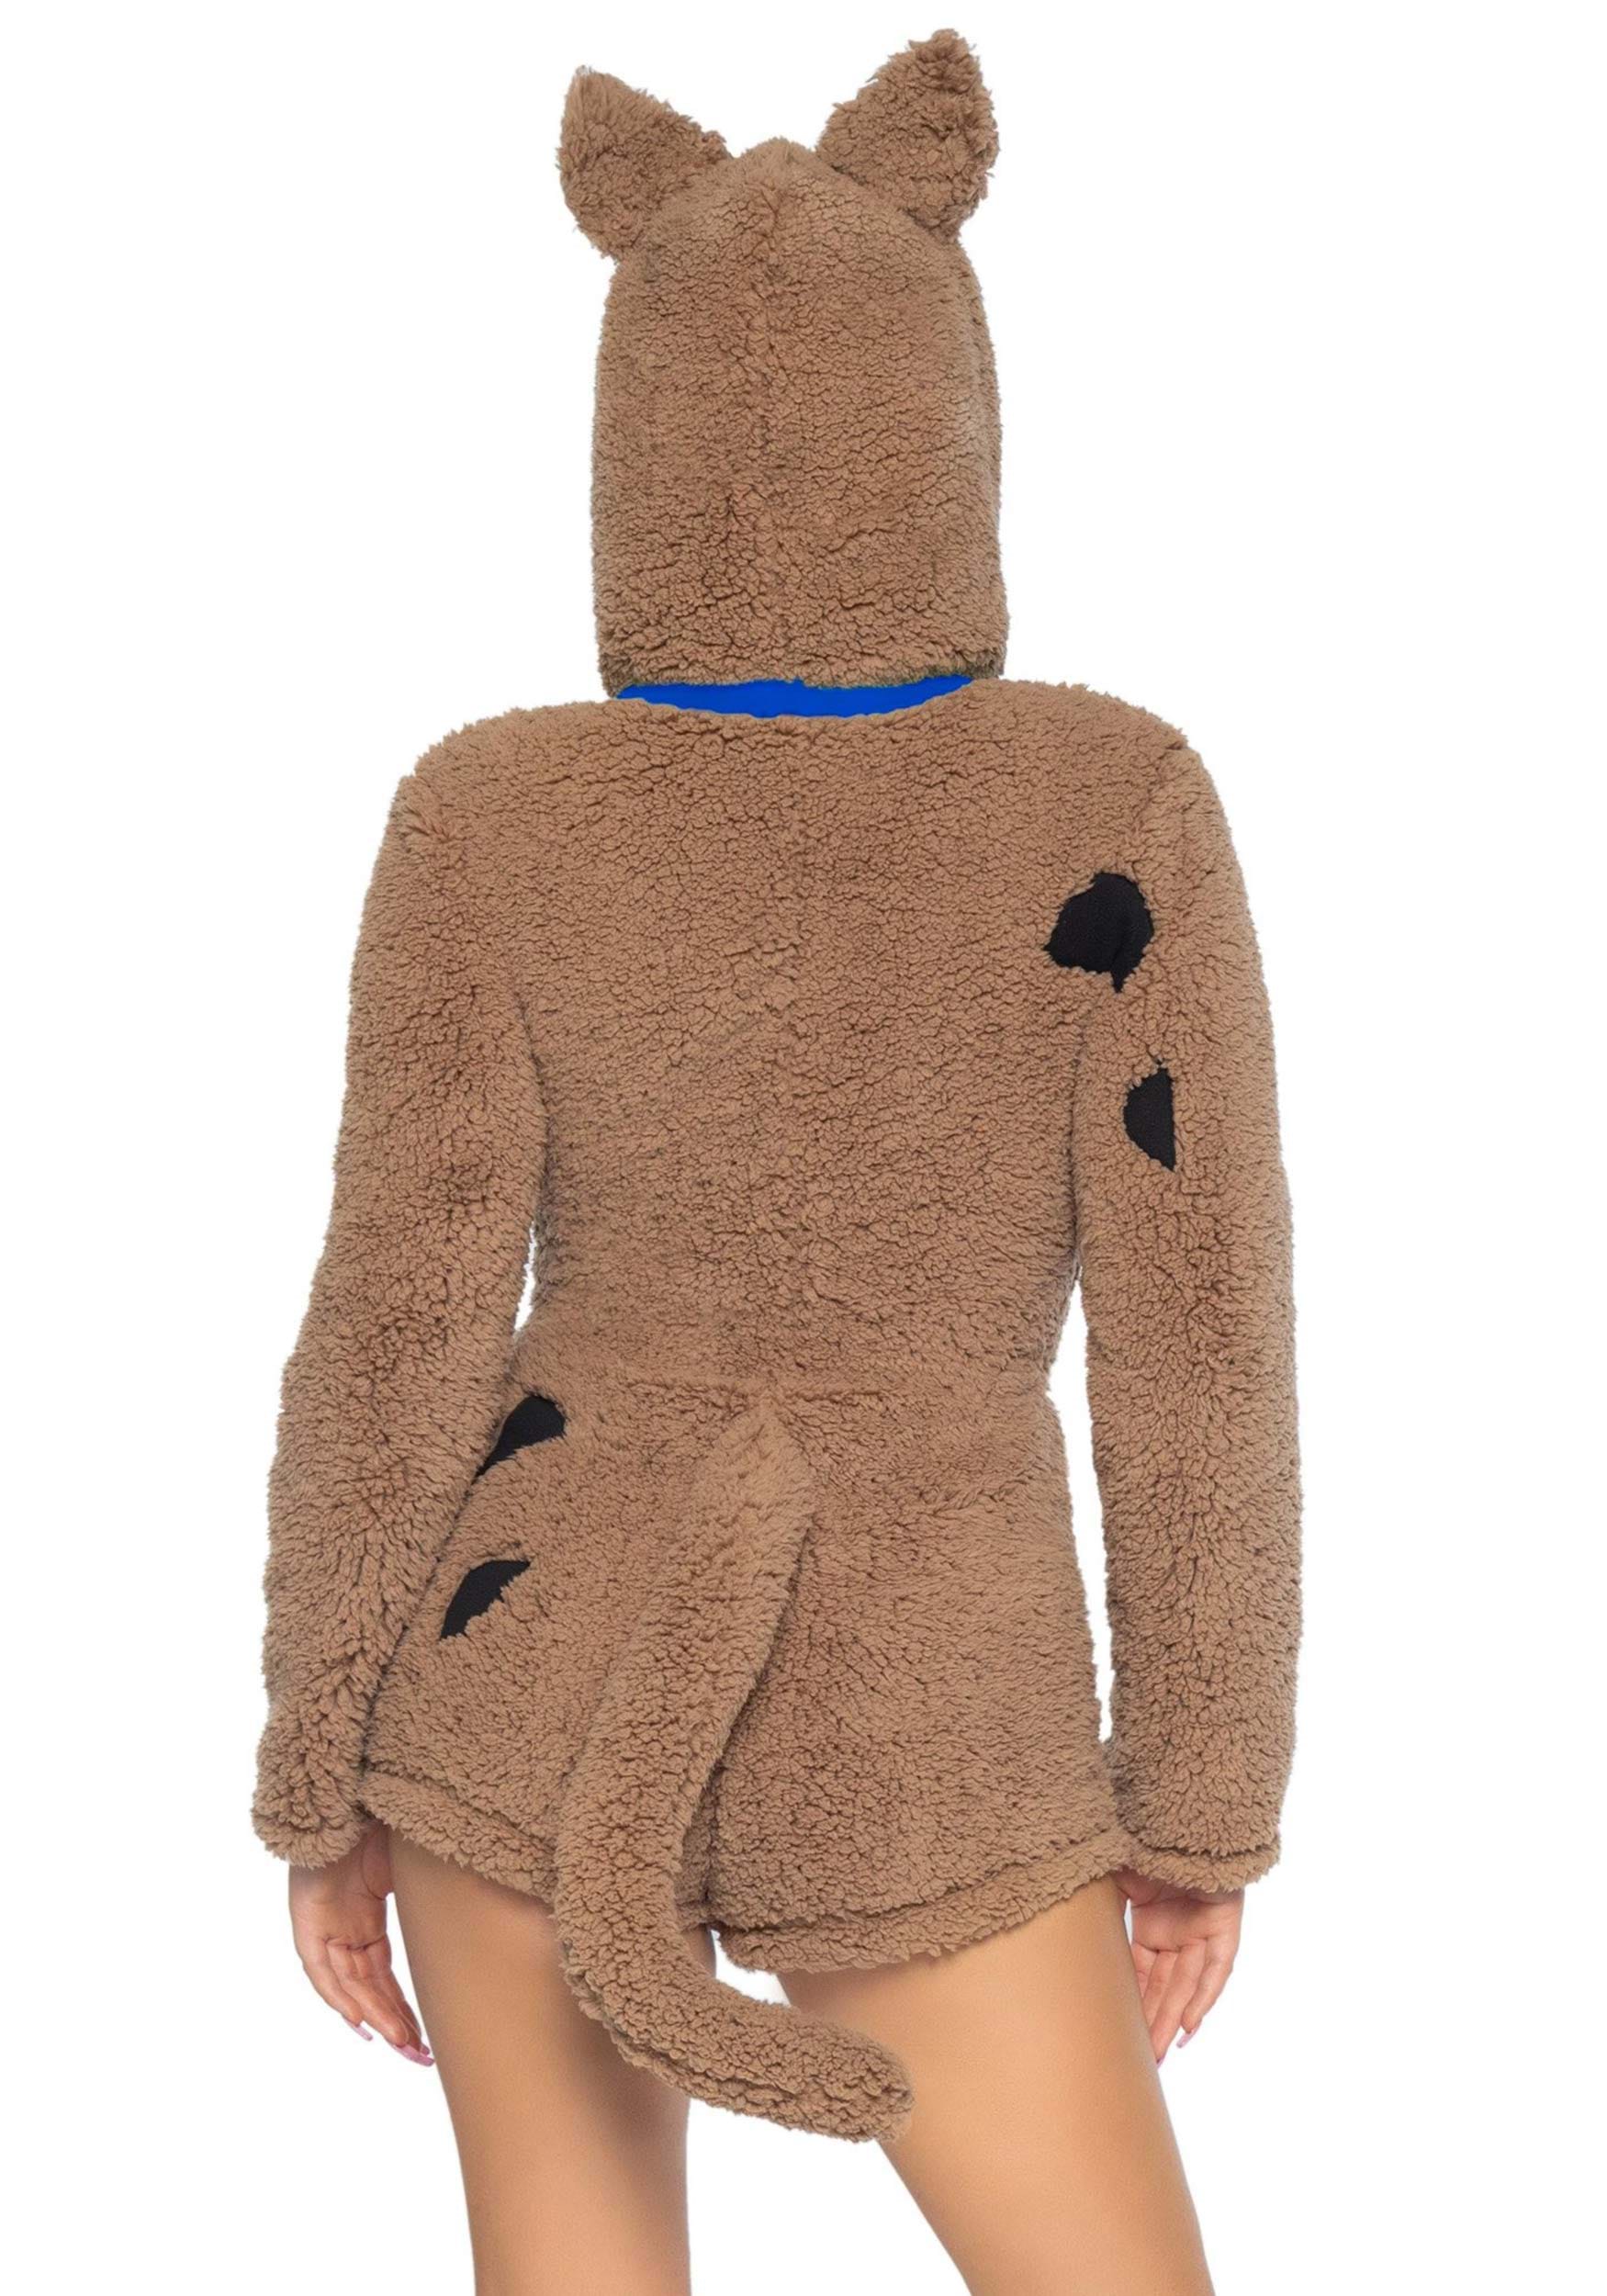 Sexy Mystery Pup Women's Costume